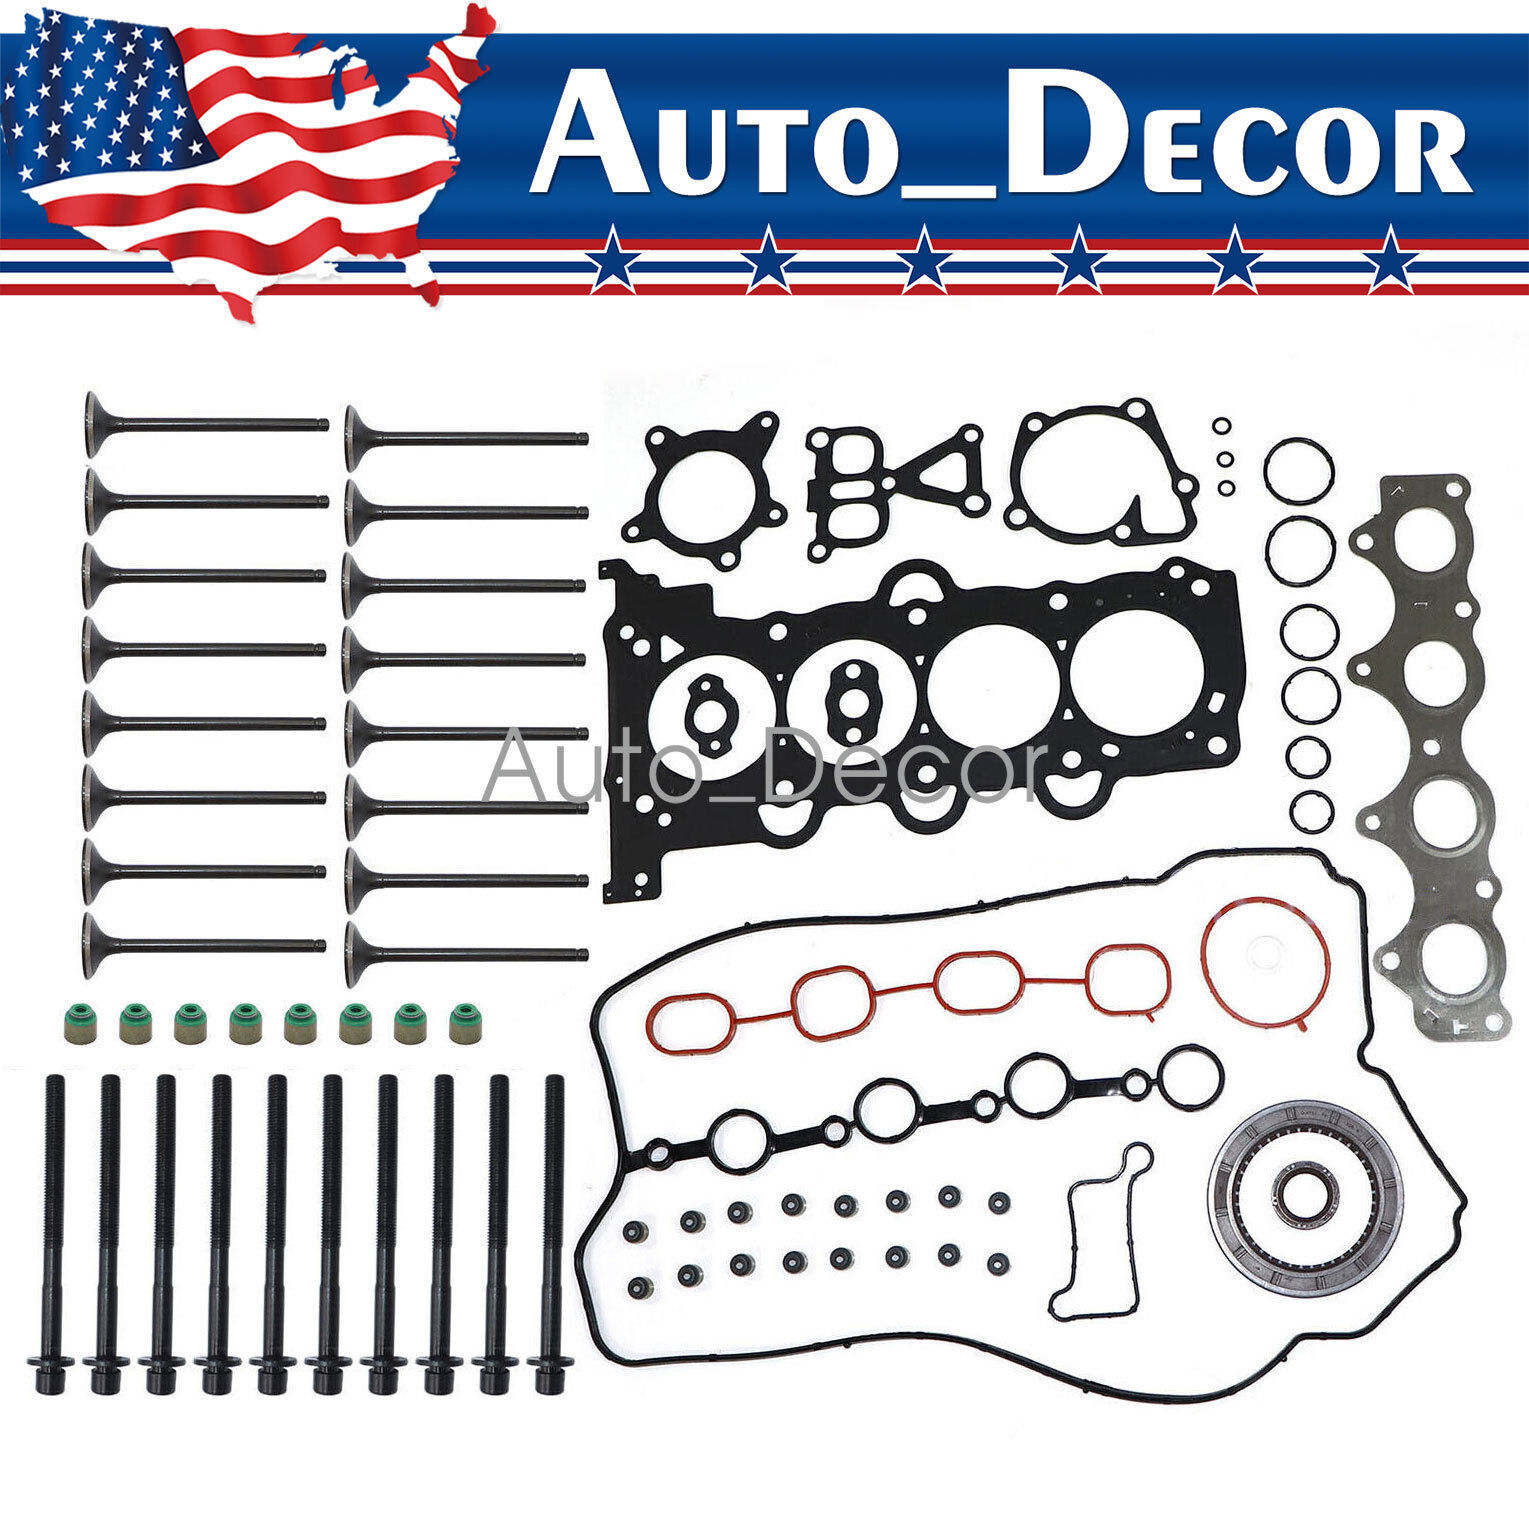 Head Gasket Set W/Bolts Intake Exhaust Valves For 12-19 Accent Veloster Rio 1.6L